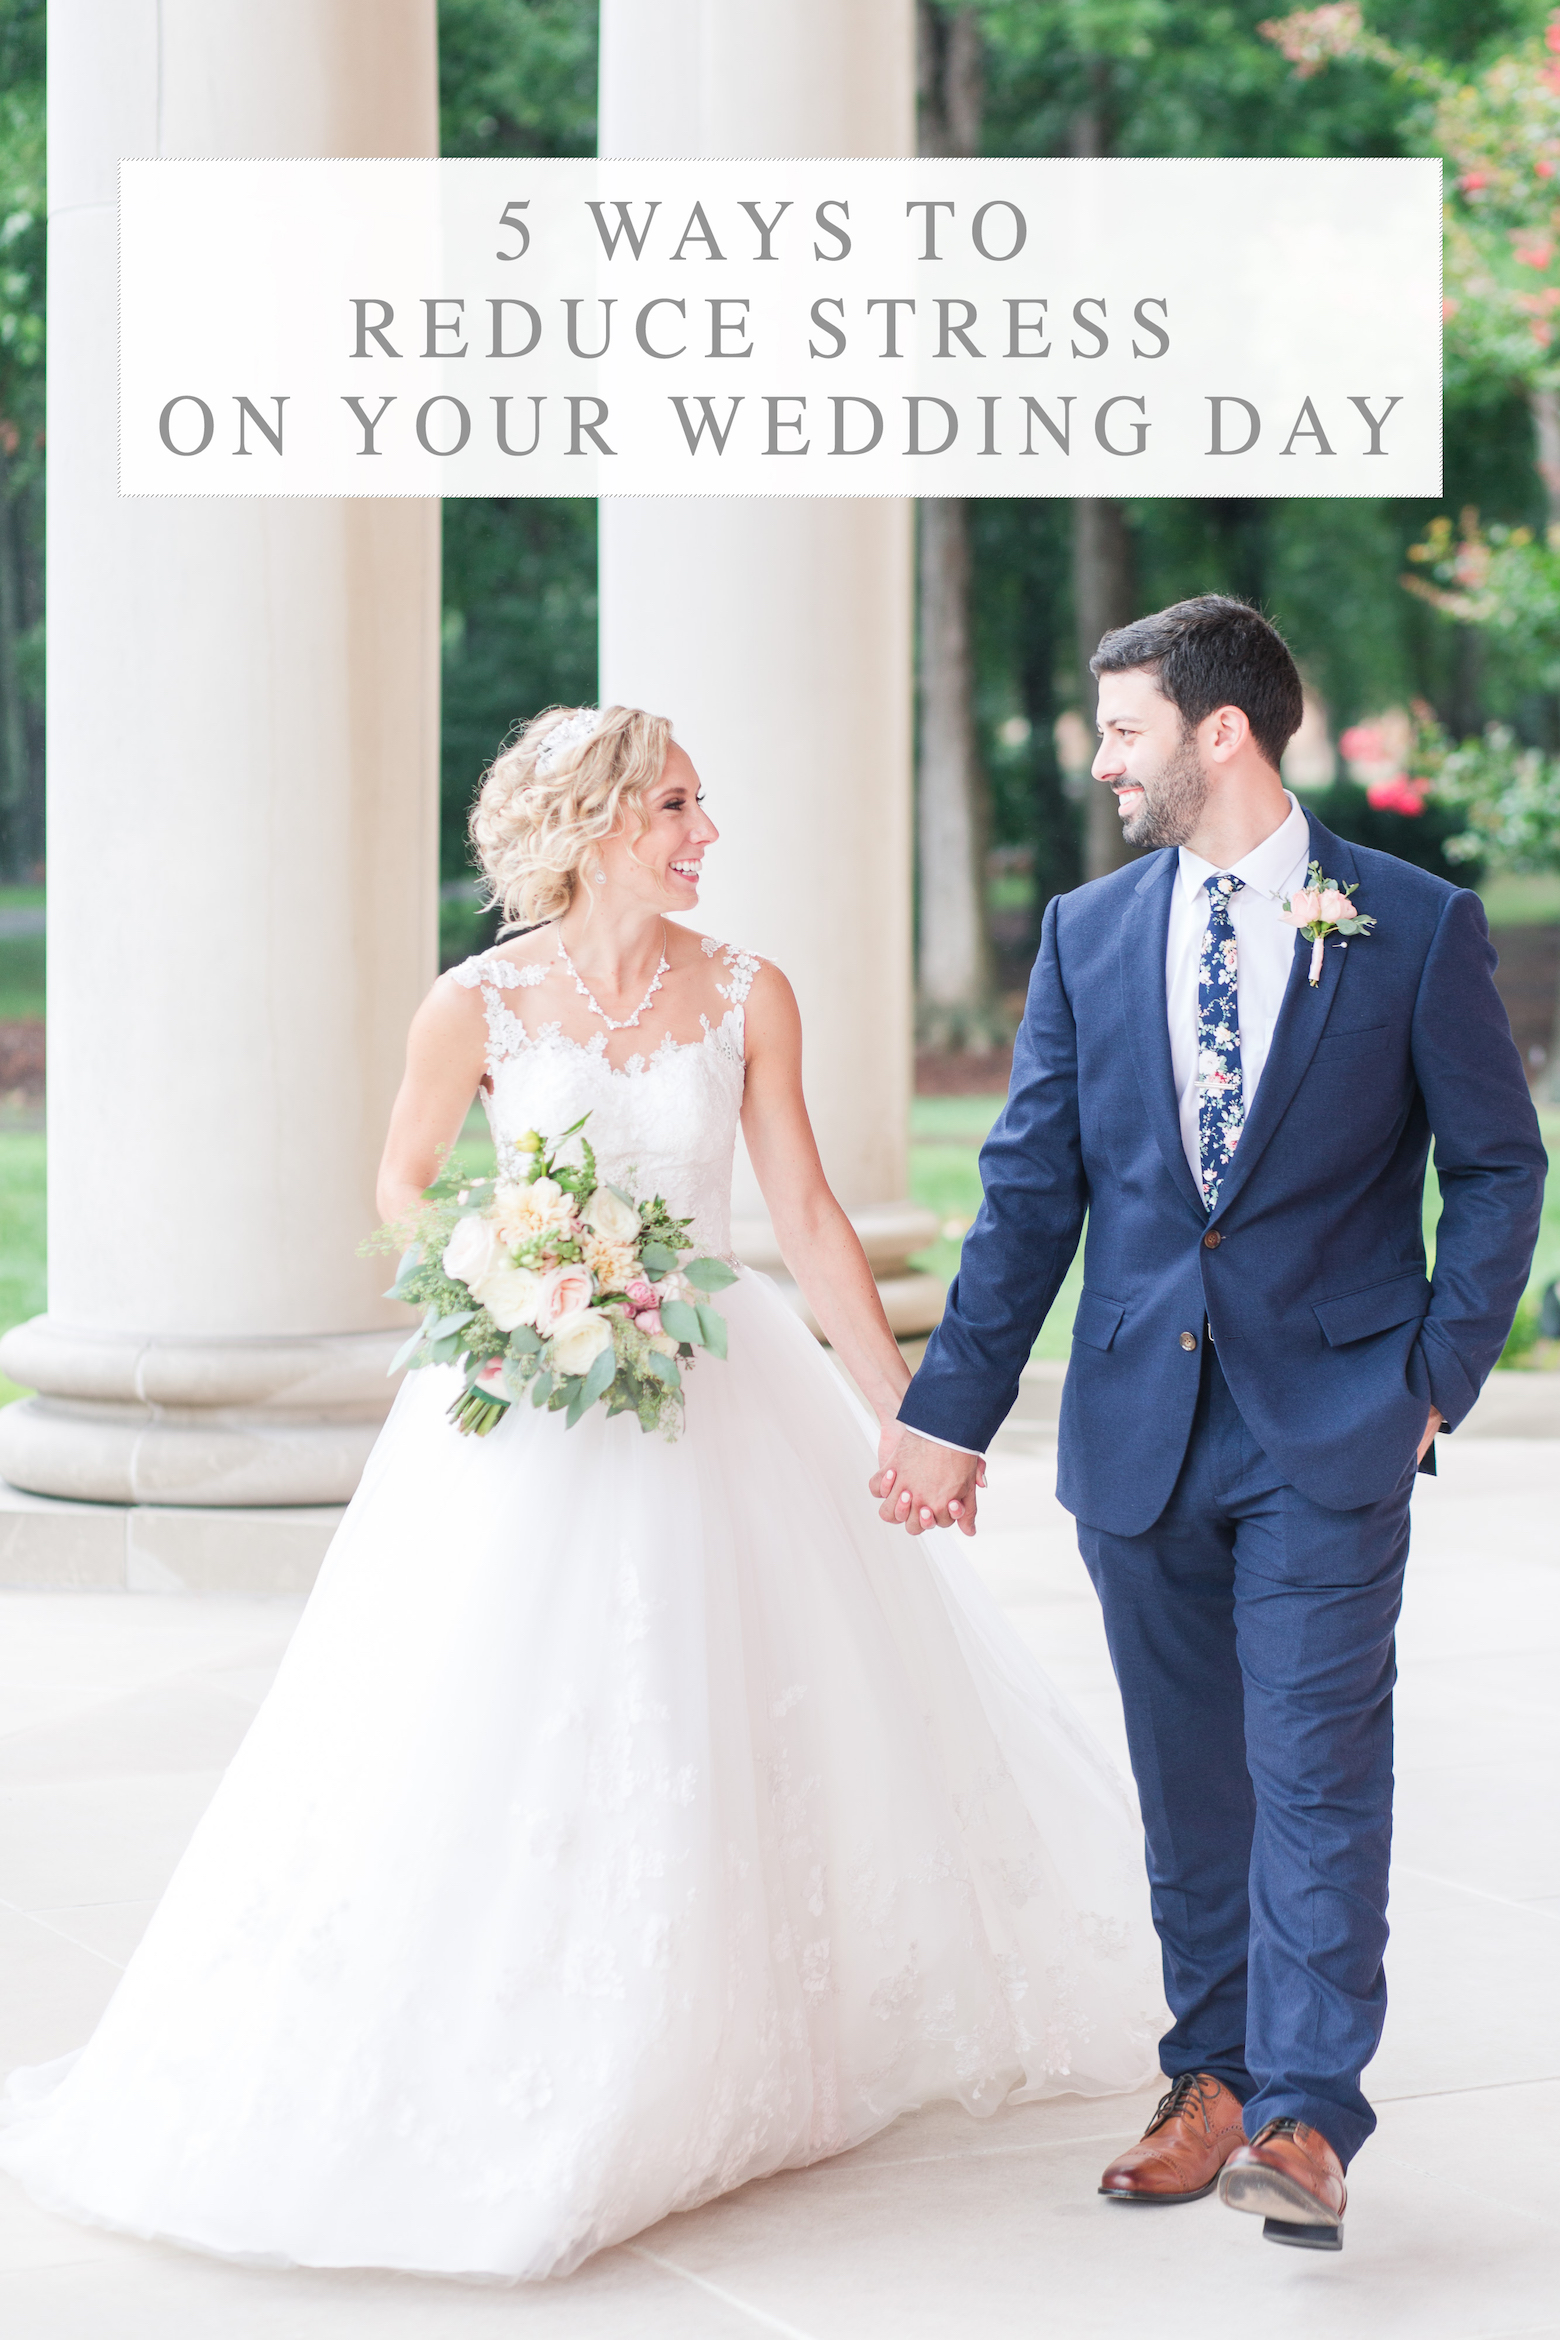 5 Ways to Reduce Stress on Your Wedding Day | Angie McPherson Photography